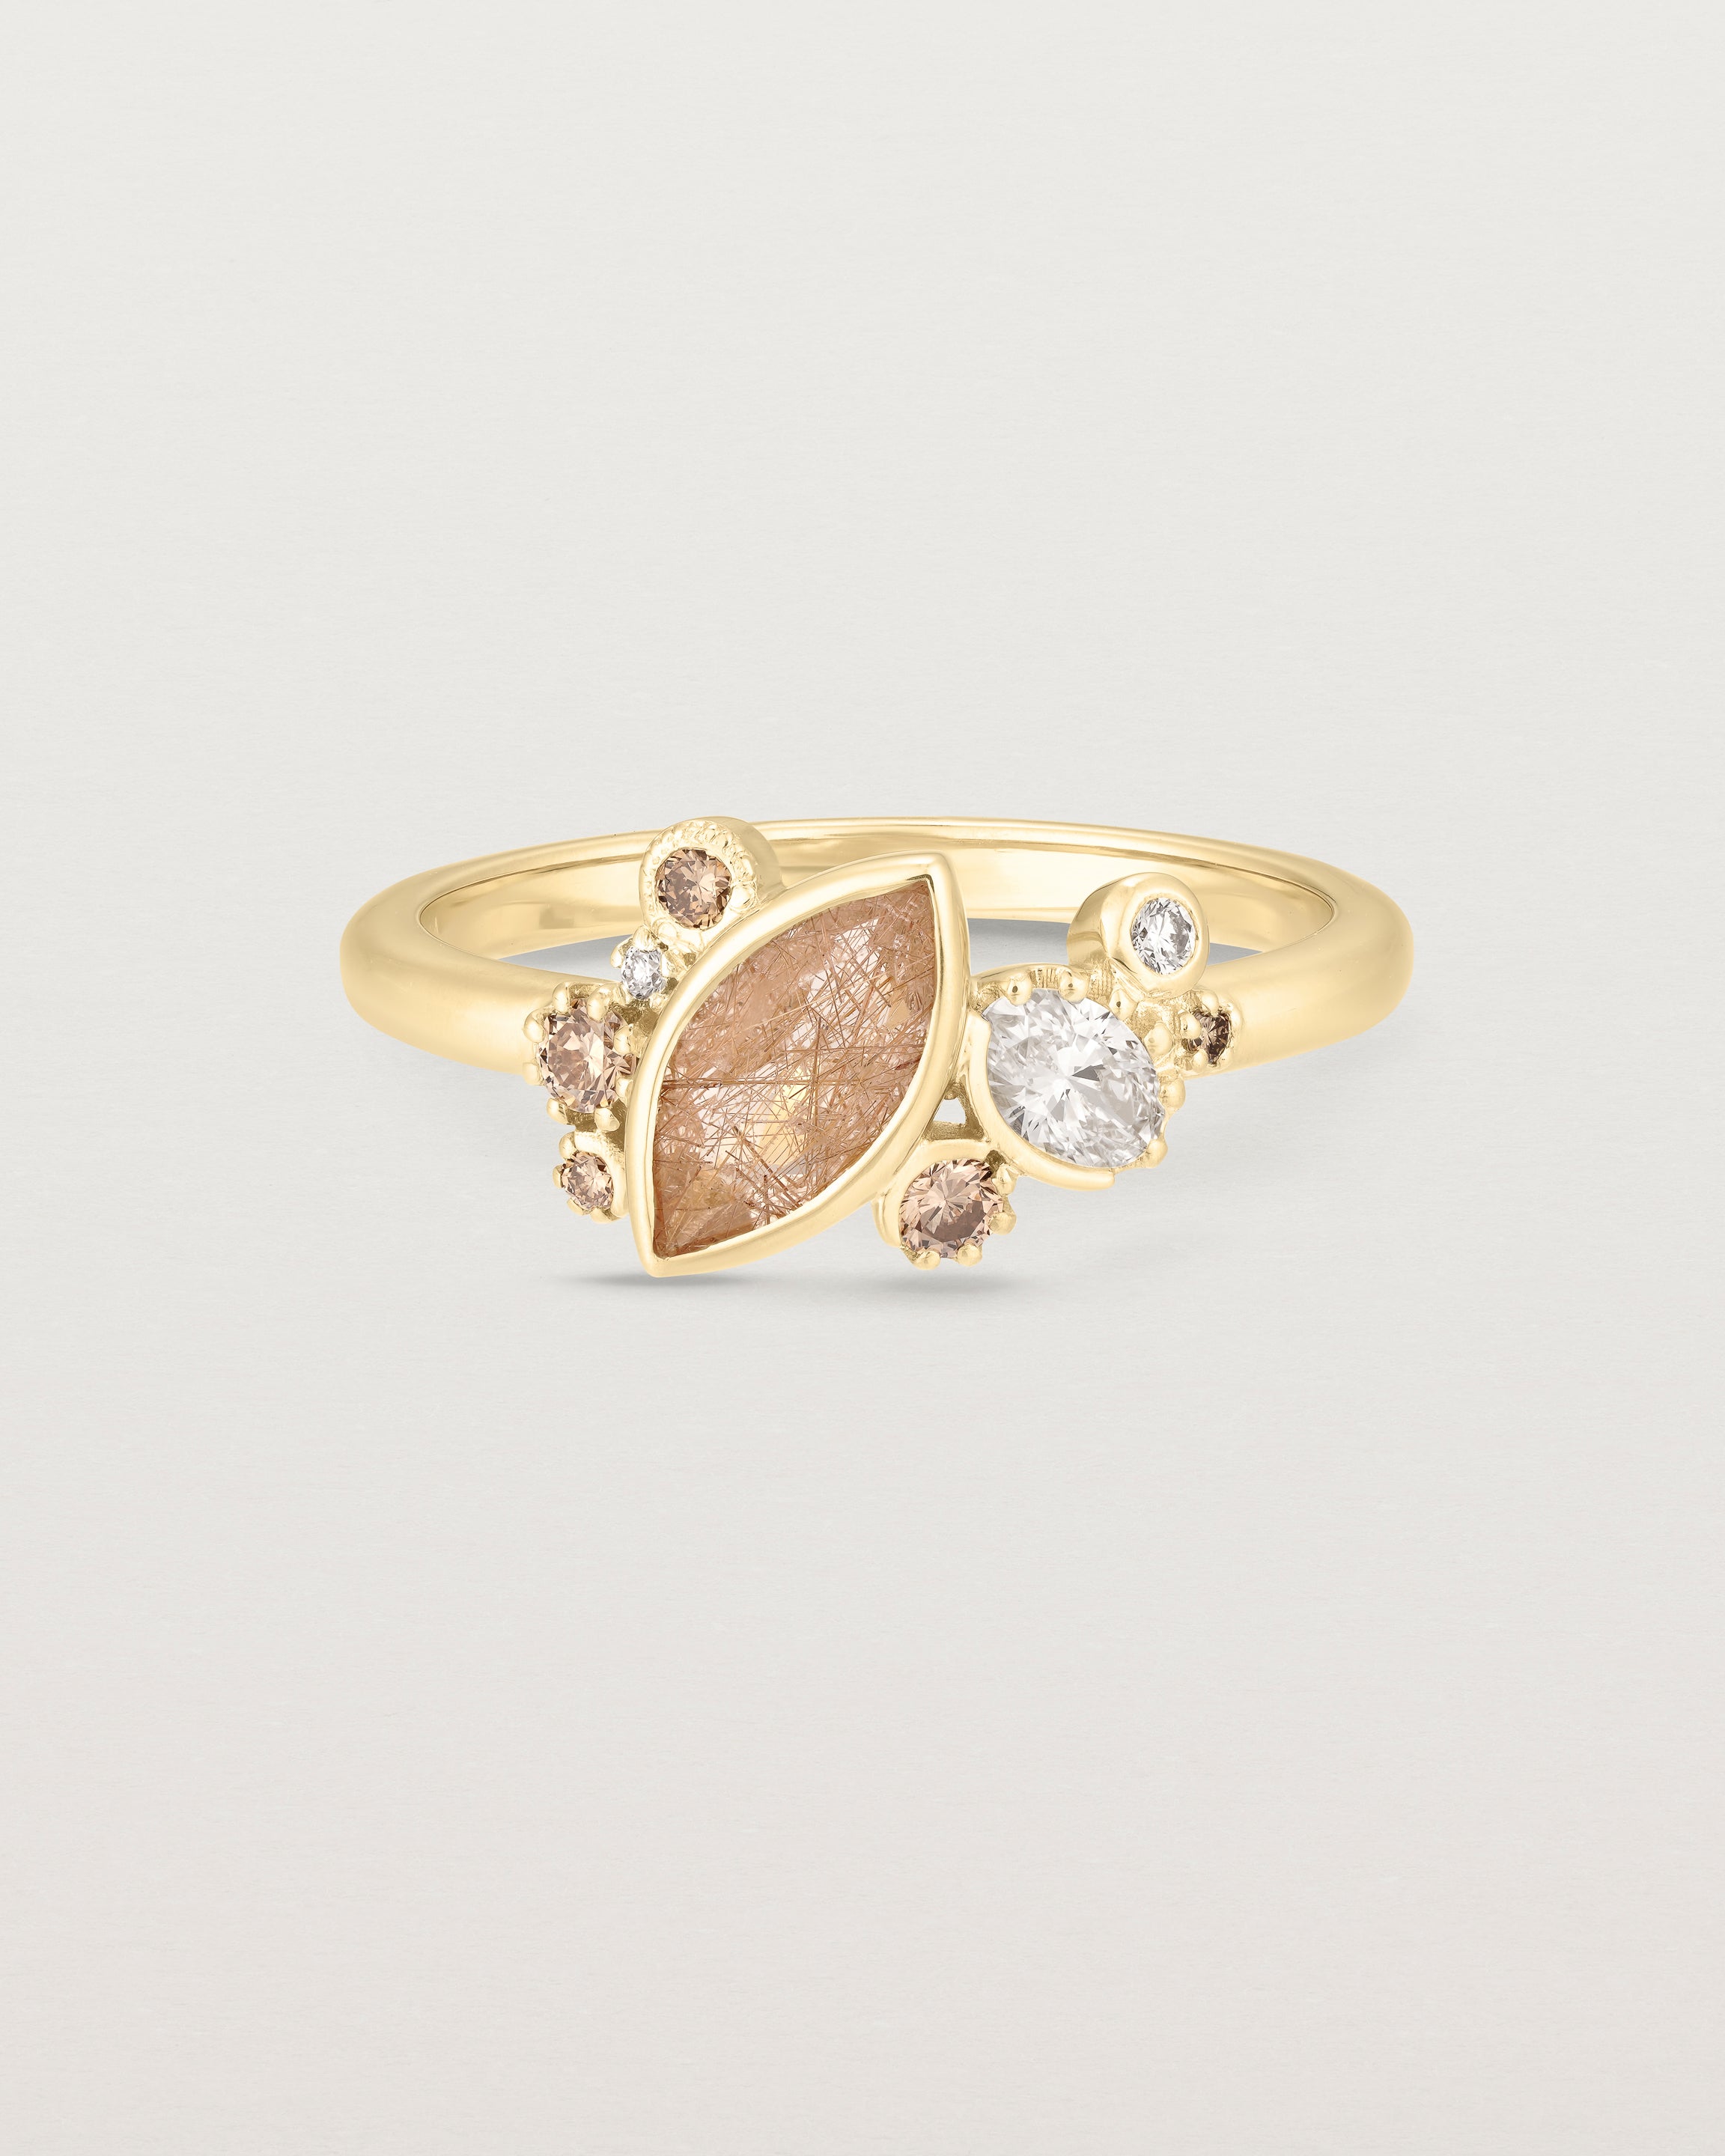 Product image of a yellow gold engagement ring with a rutilated quartz and diamonds